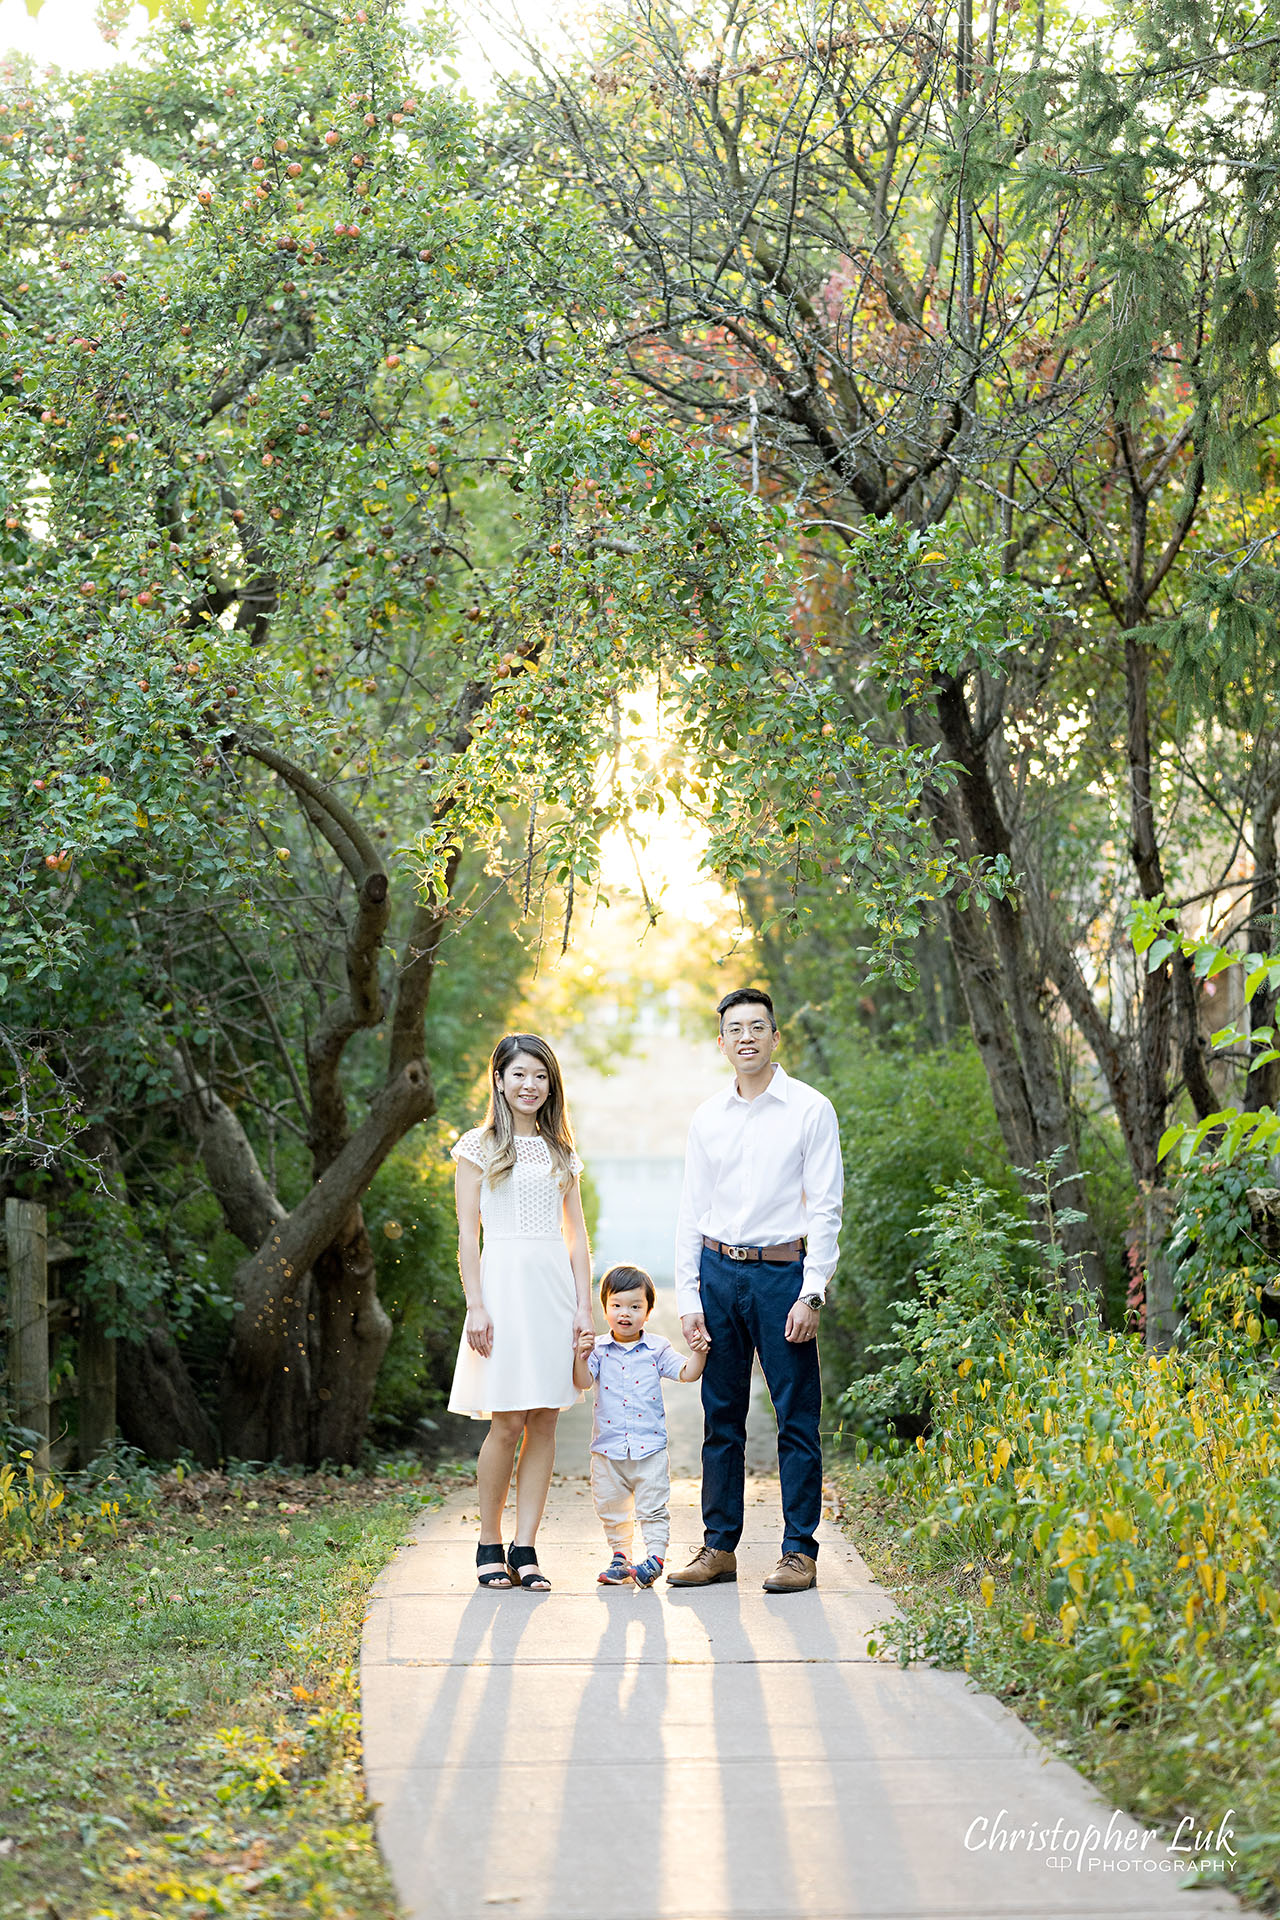 Christopher Luk Markham Family Photographer Photojournalistic Candid Natural Organic Husband Wife Mom Dad Son Child Family Portrait